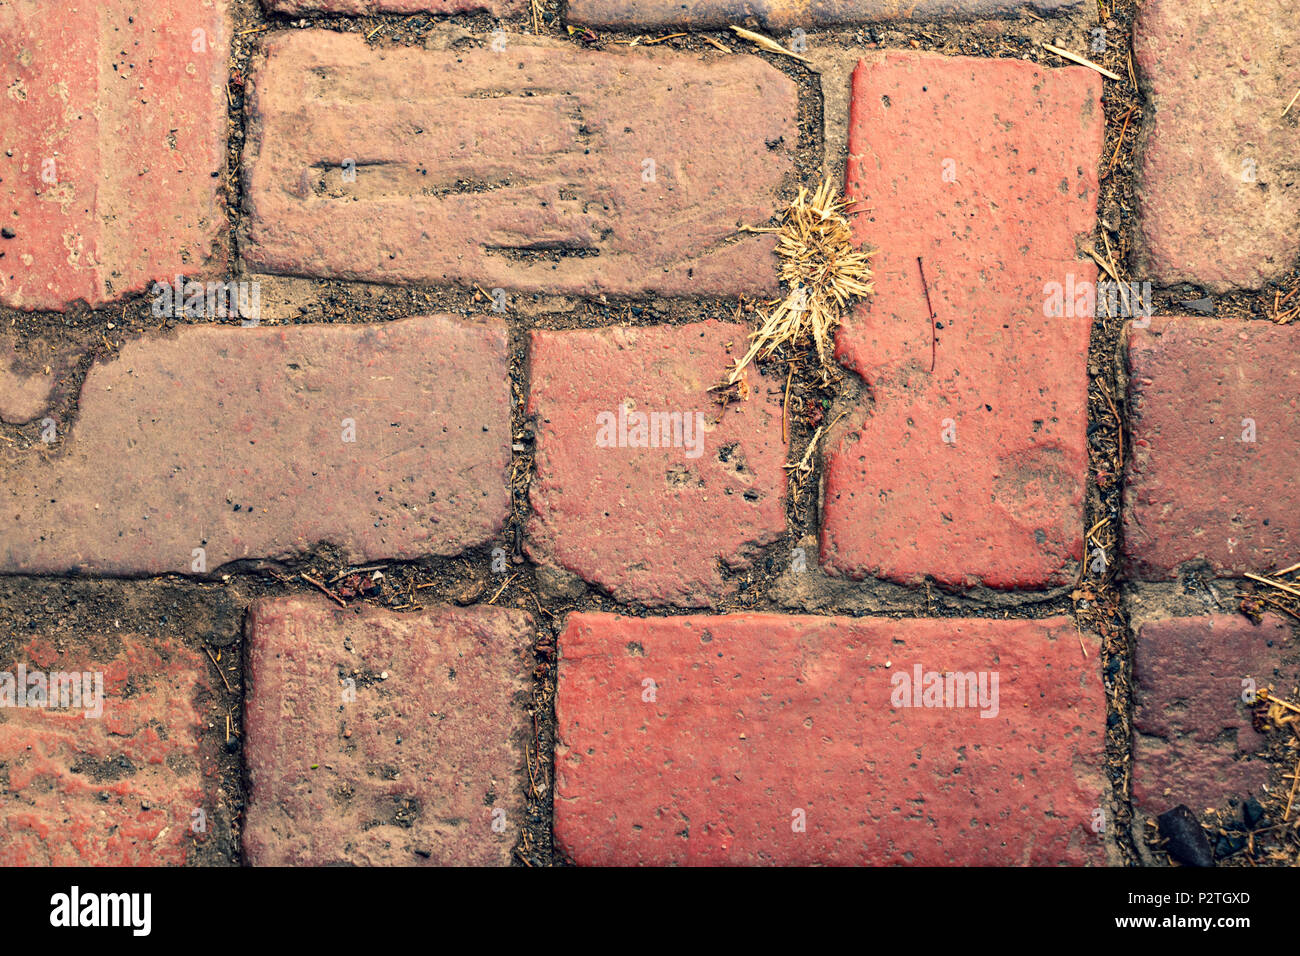 a red brick pathway or road, the bricks are well worn Stock Photo